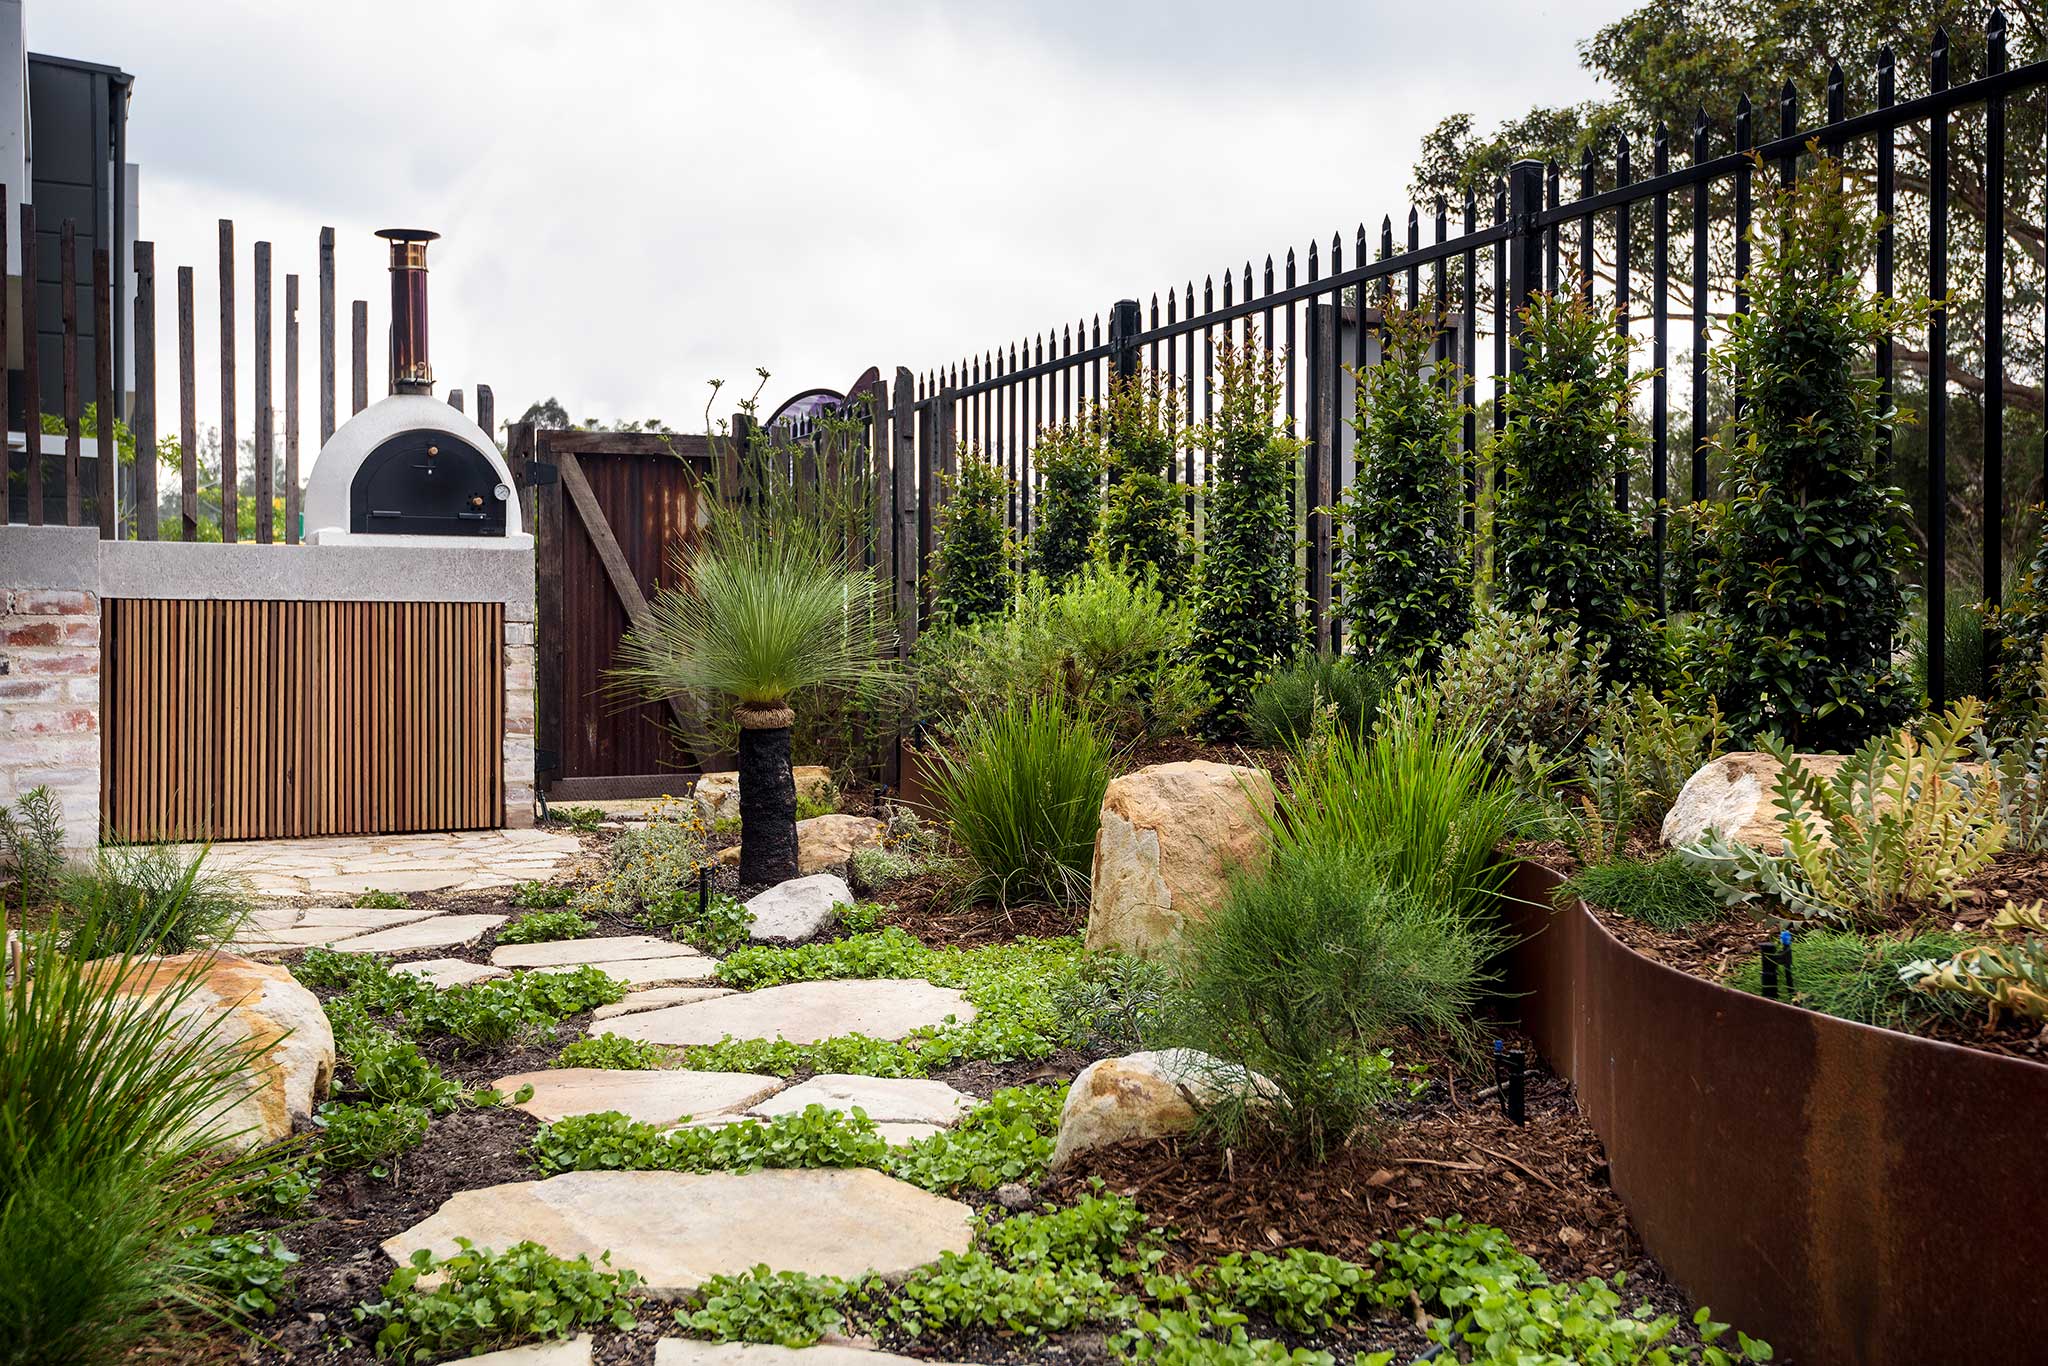 MBS native courtyard landscape design showing paved pathway, groundcover, native plants, wood fired oven and garden beds